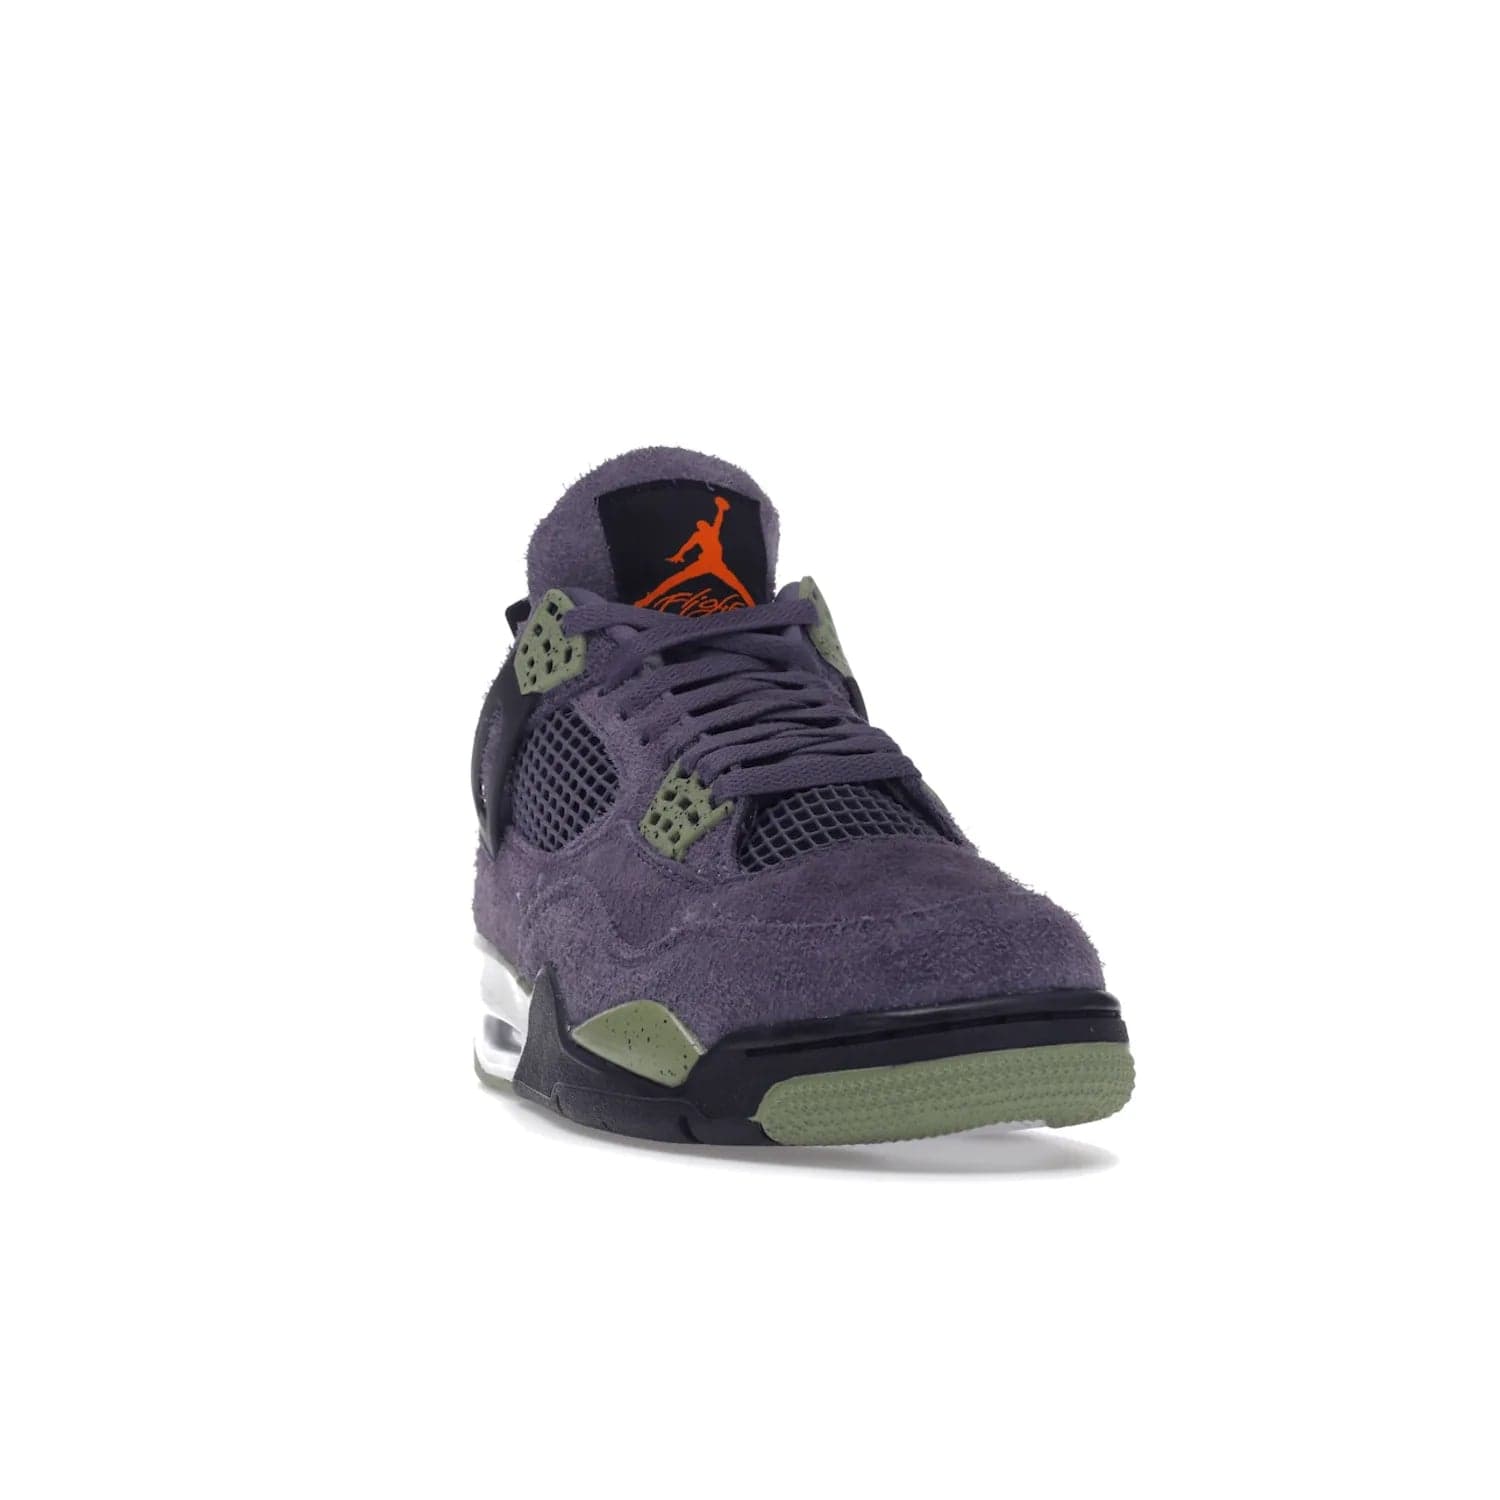 Jordan 4 Retro Canyon Purple (Women's) - Image 8 - Only at www.BallersClubKickz.com - New Air Jordan 4 Retro Canyon Purple W sneaker features shaggy purple suede, lime highlights & safety orange Jumpman branding. Classic ankle-hugging silhouette with modern colors released 15/10/2022.